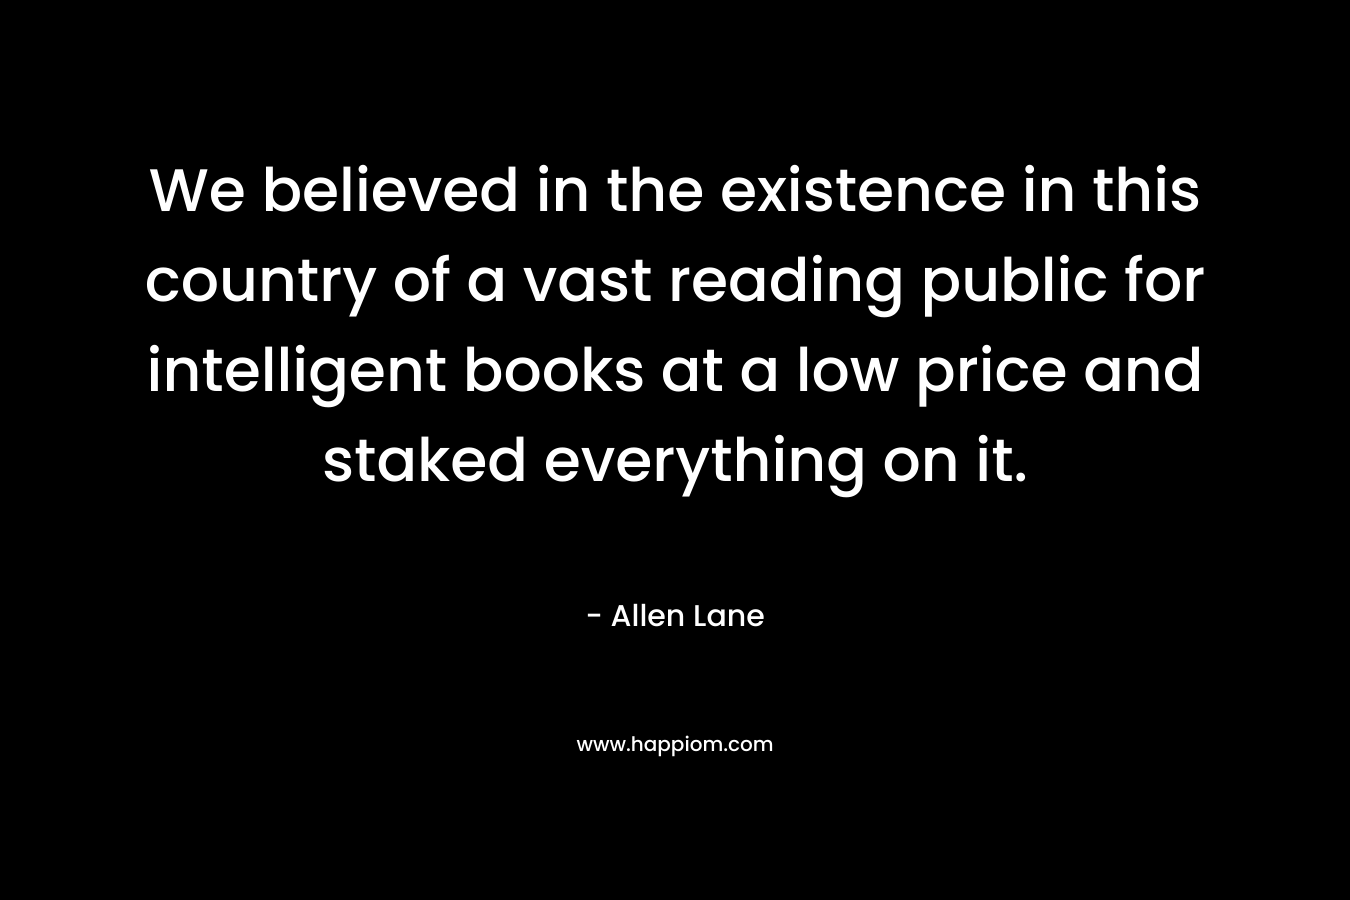 We believed in the existence in this country of a vast reading public for intelligent books at a low price and staked everything on it. – Allen Lane